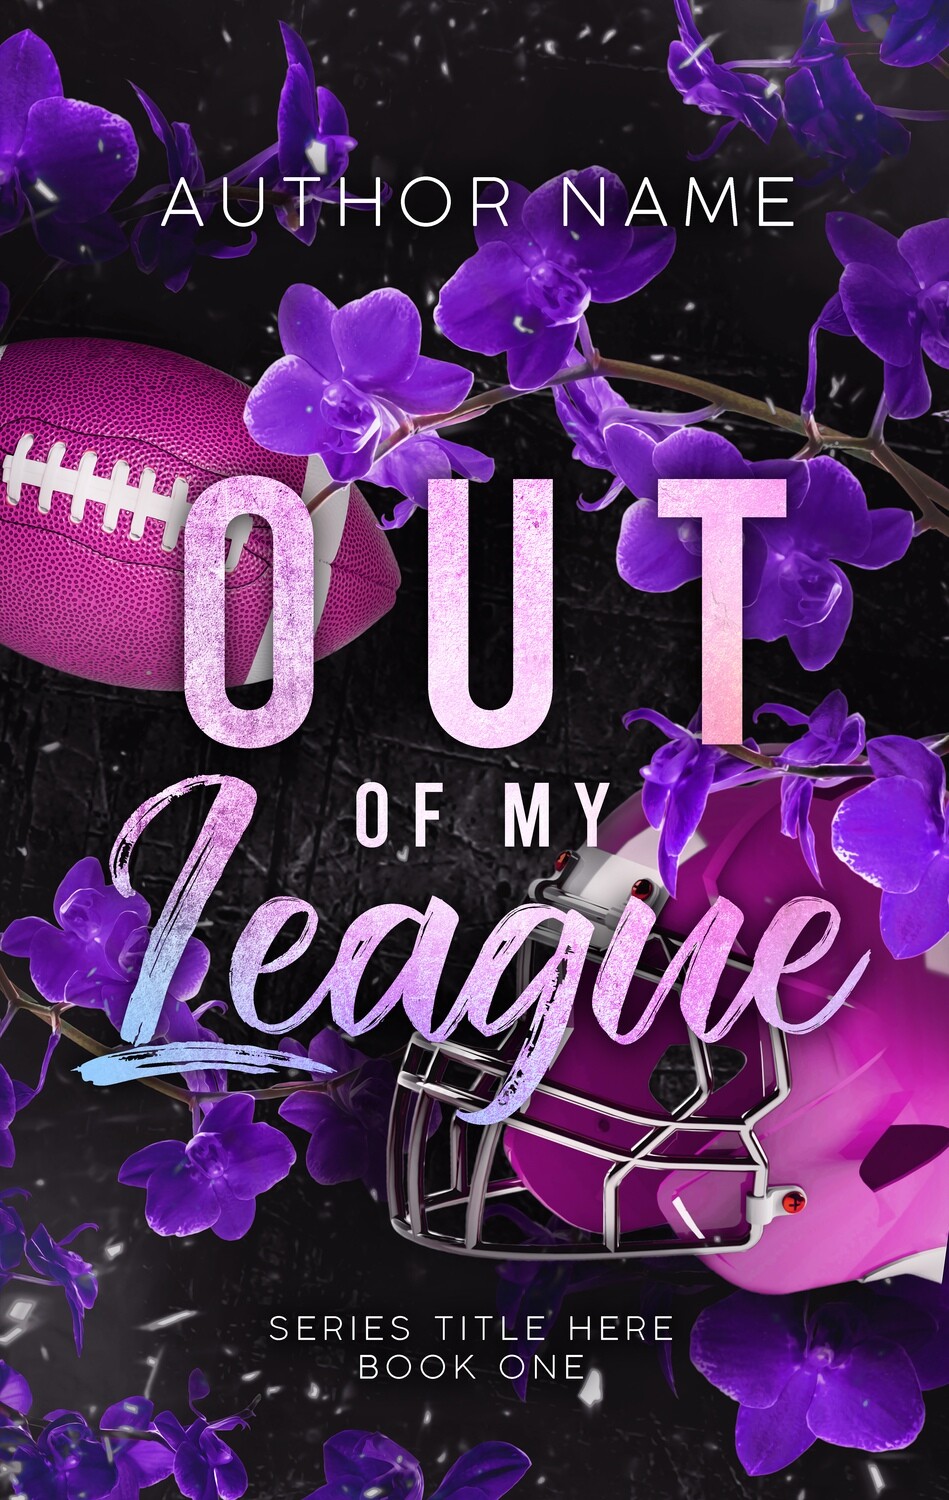 OUT OF MY LEAGUE